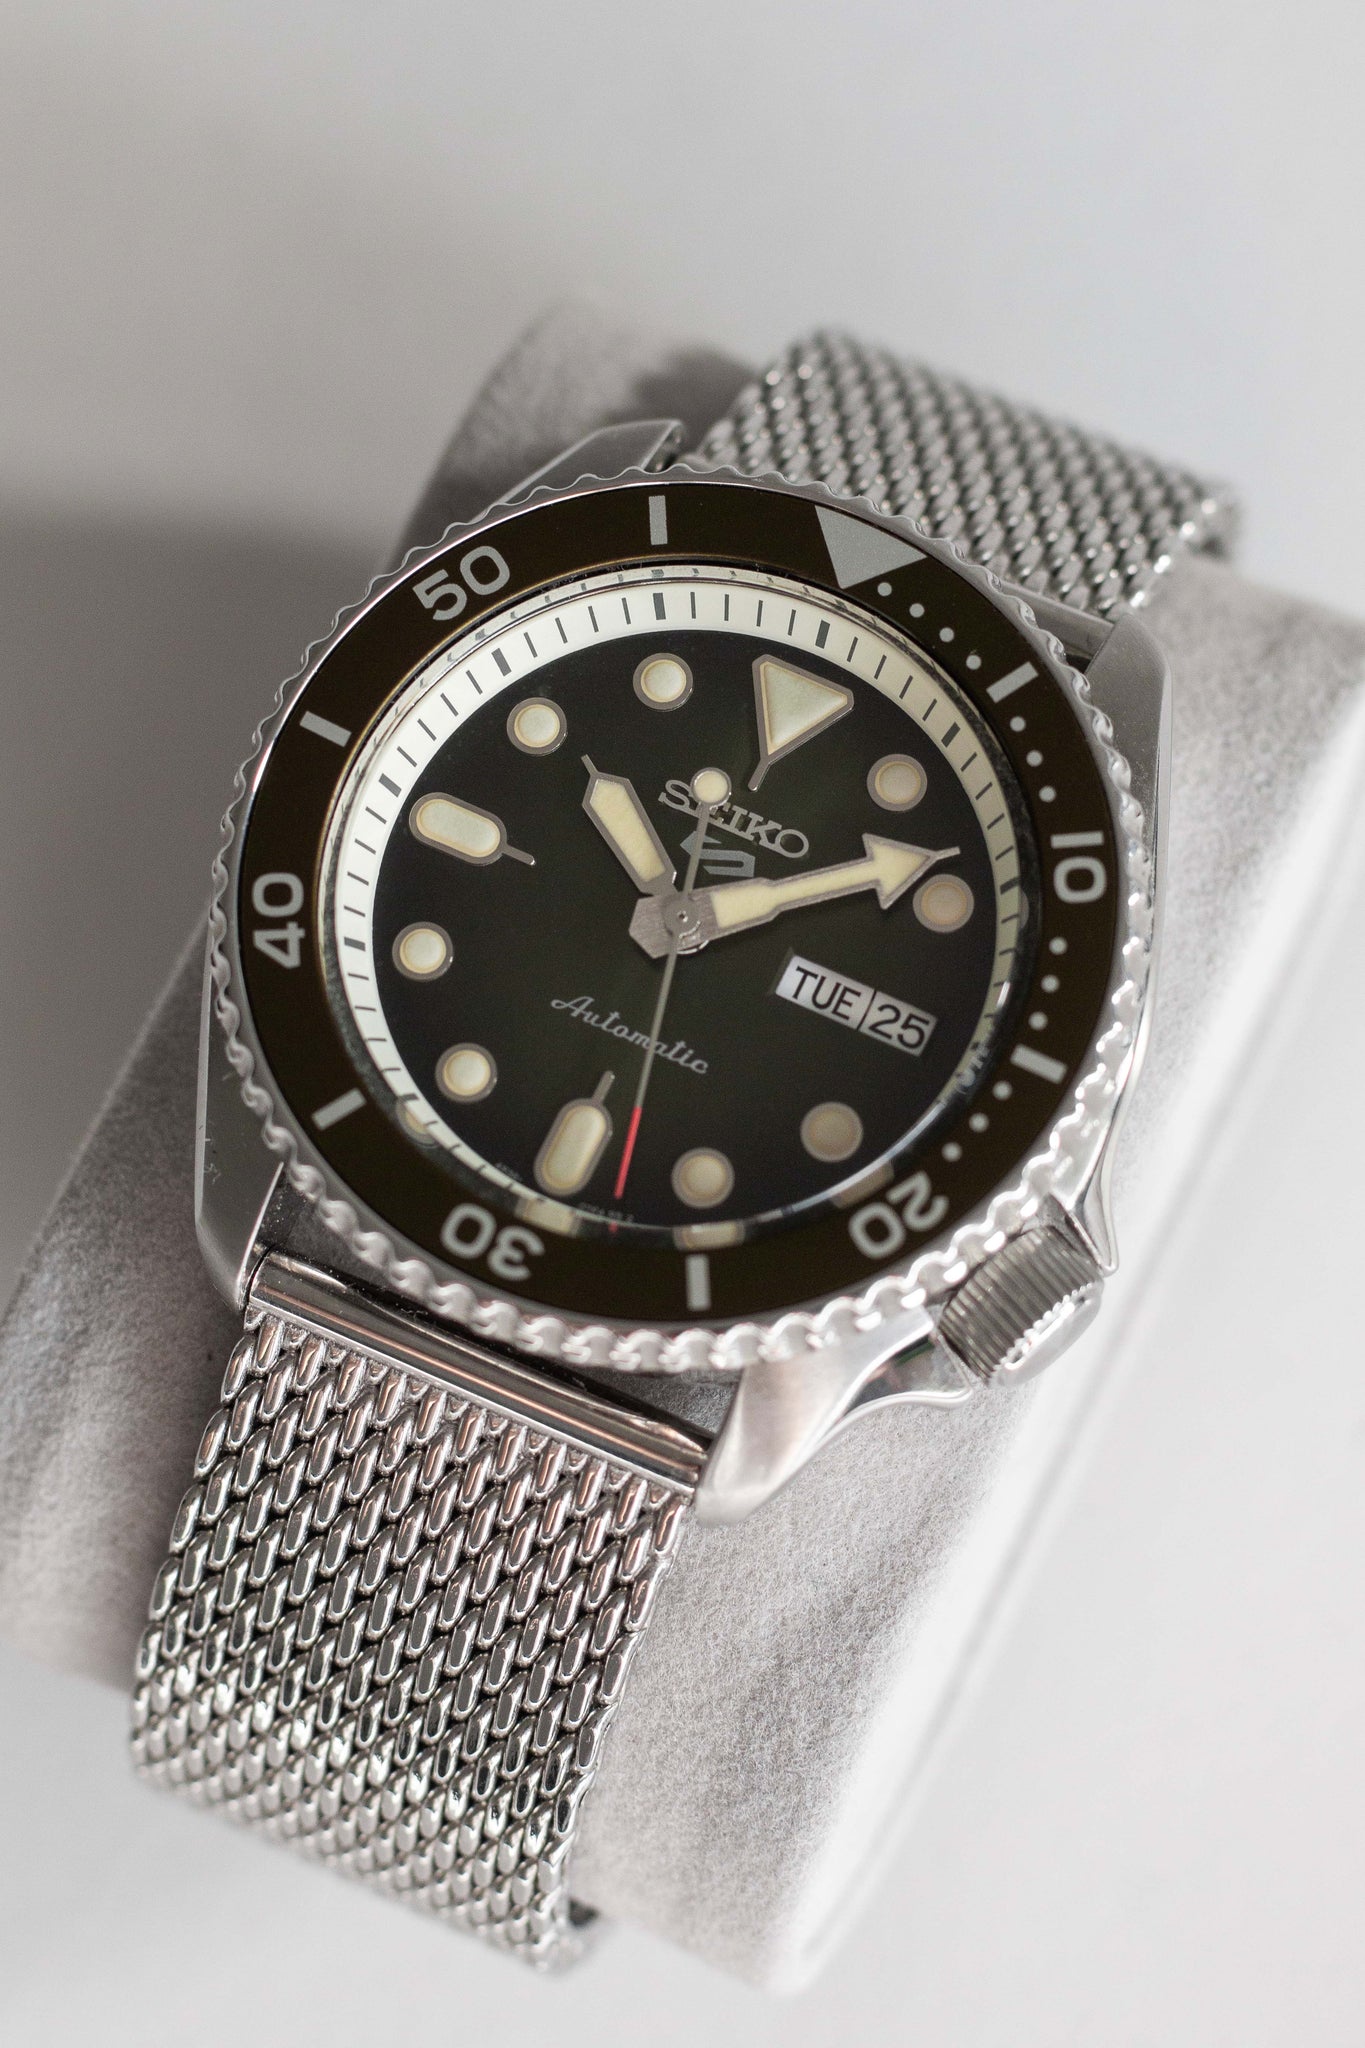 Seiko 5 Sports Diver Ref. SRPD75K1 2019 w/ Box & Papers